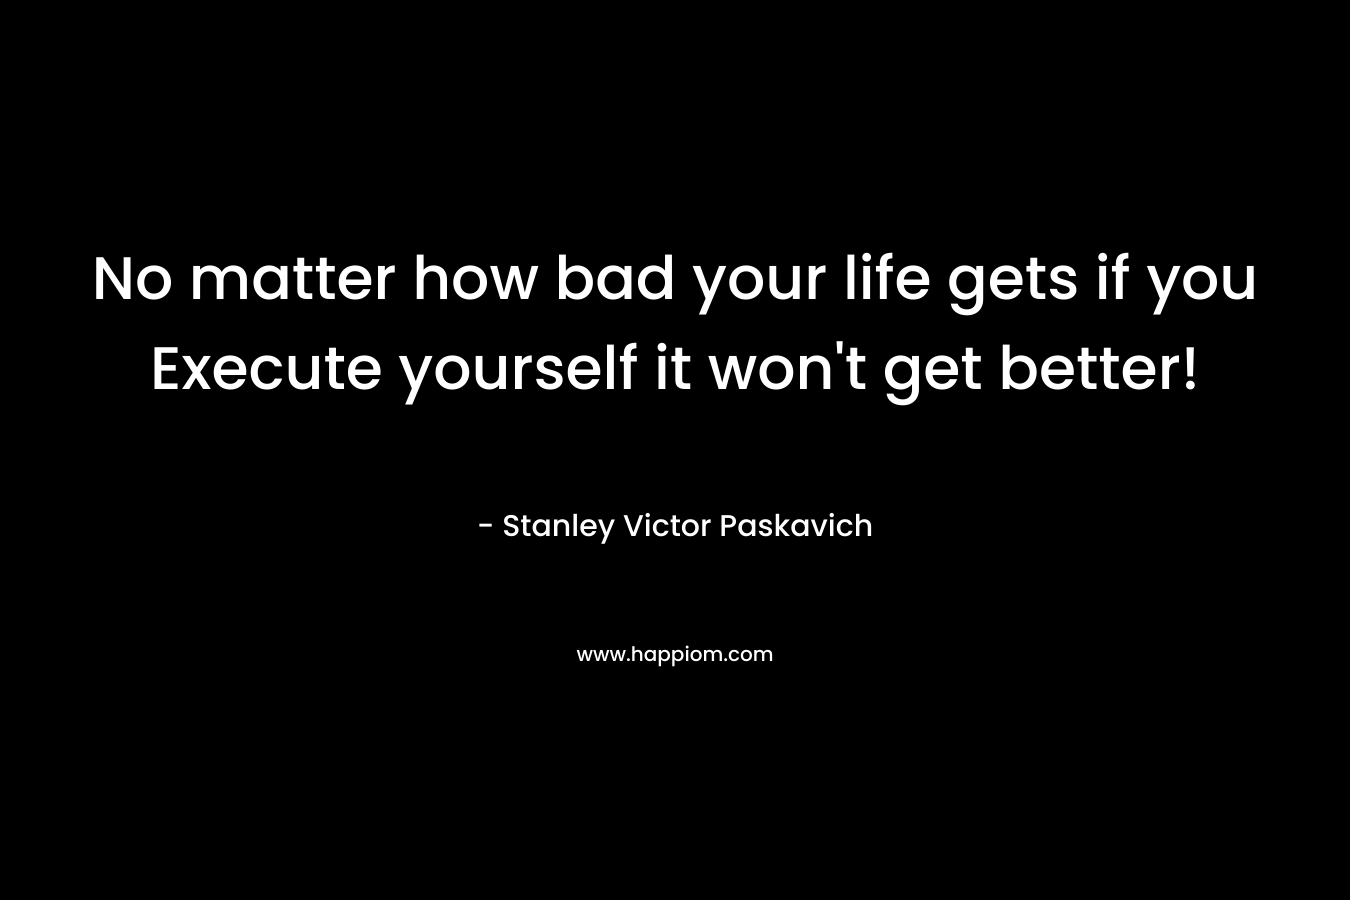 No matter how bad your life gets if you Execute yourself it won't get better!